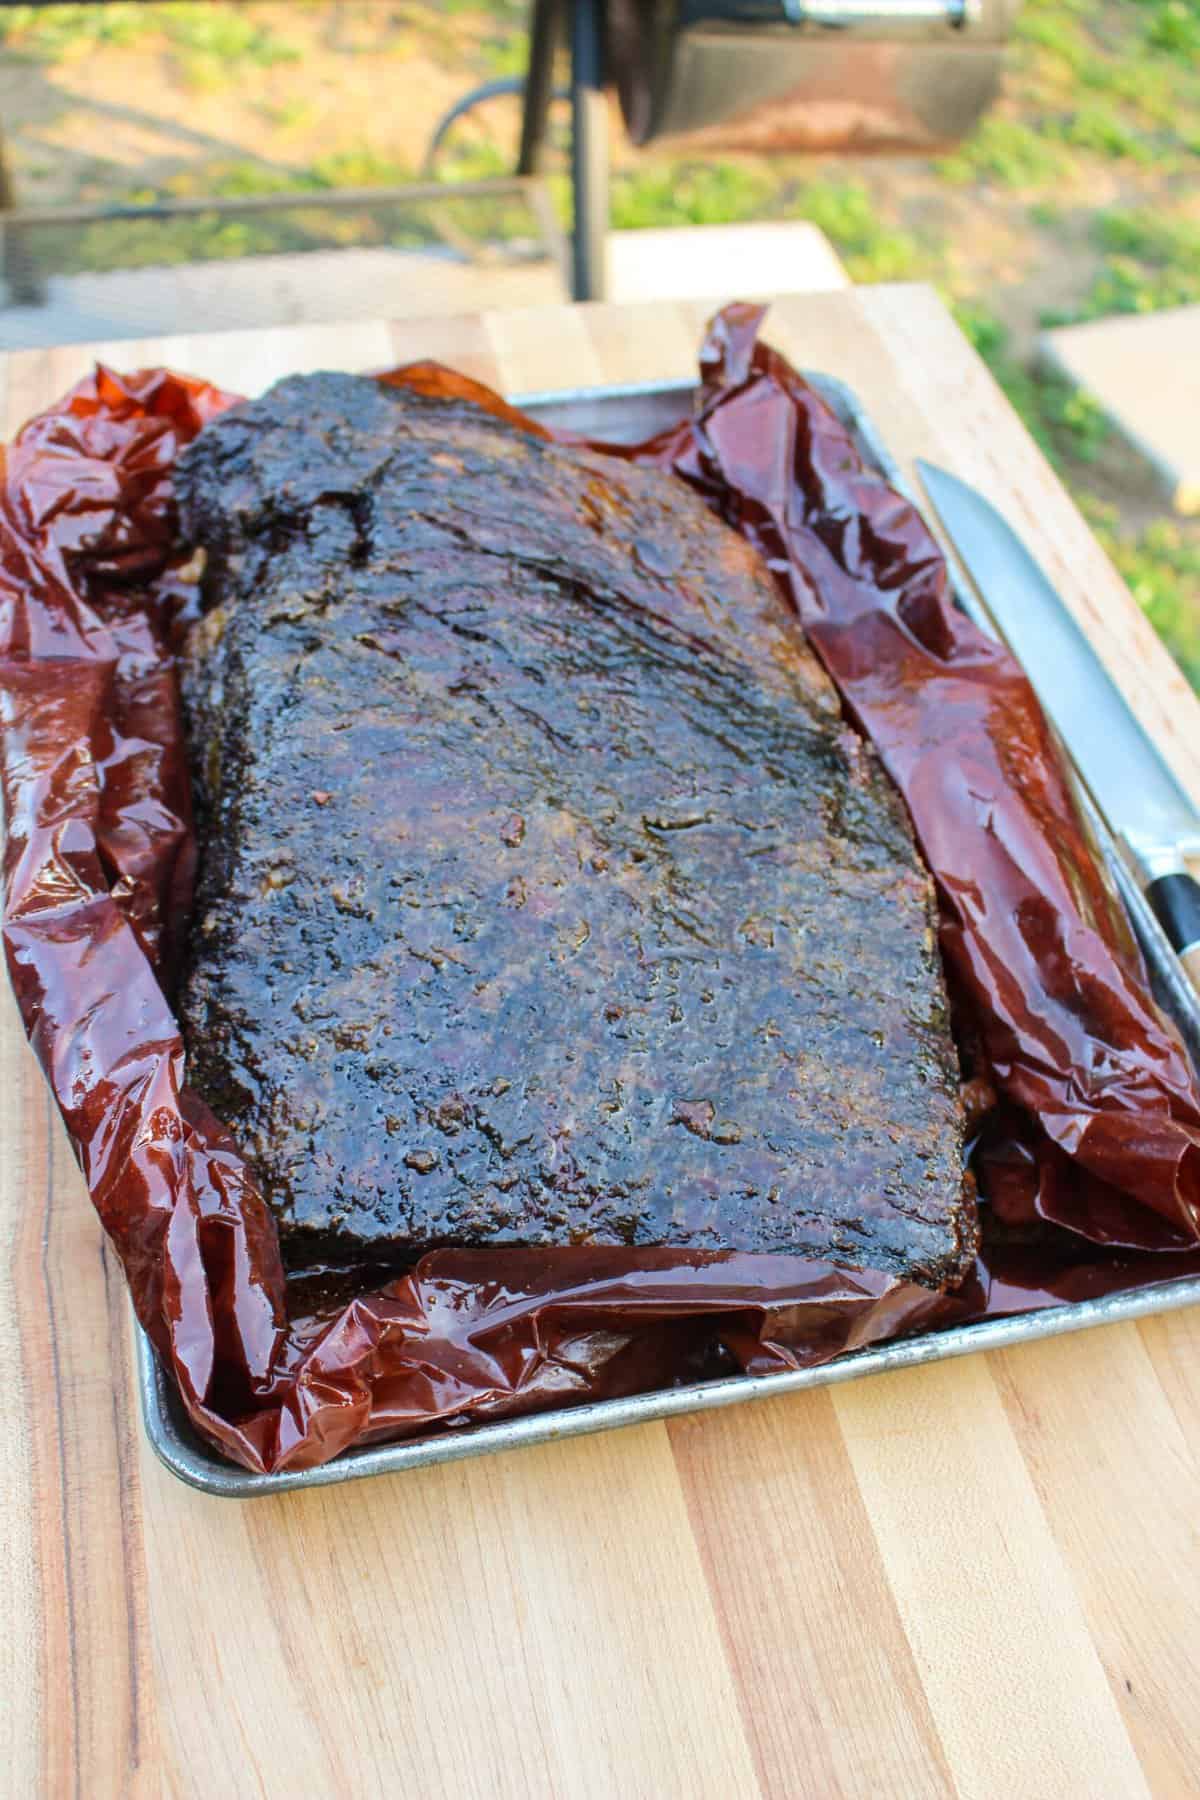 Texas Smoked Brisket getting unwrapped after it has rested.